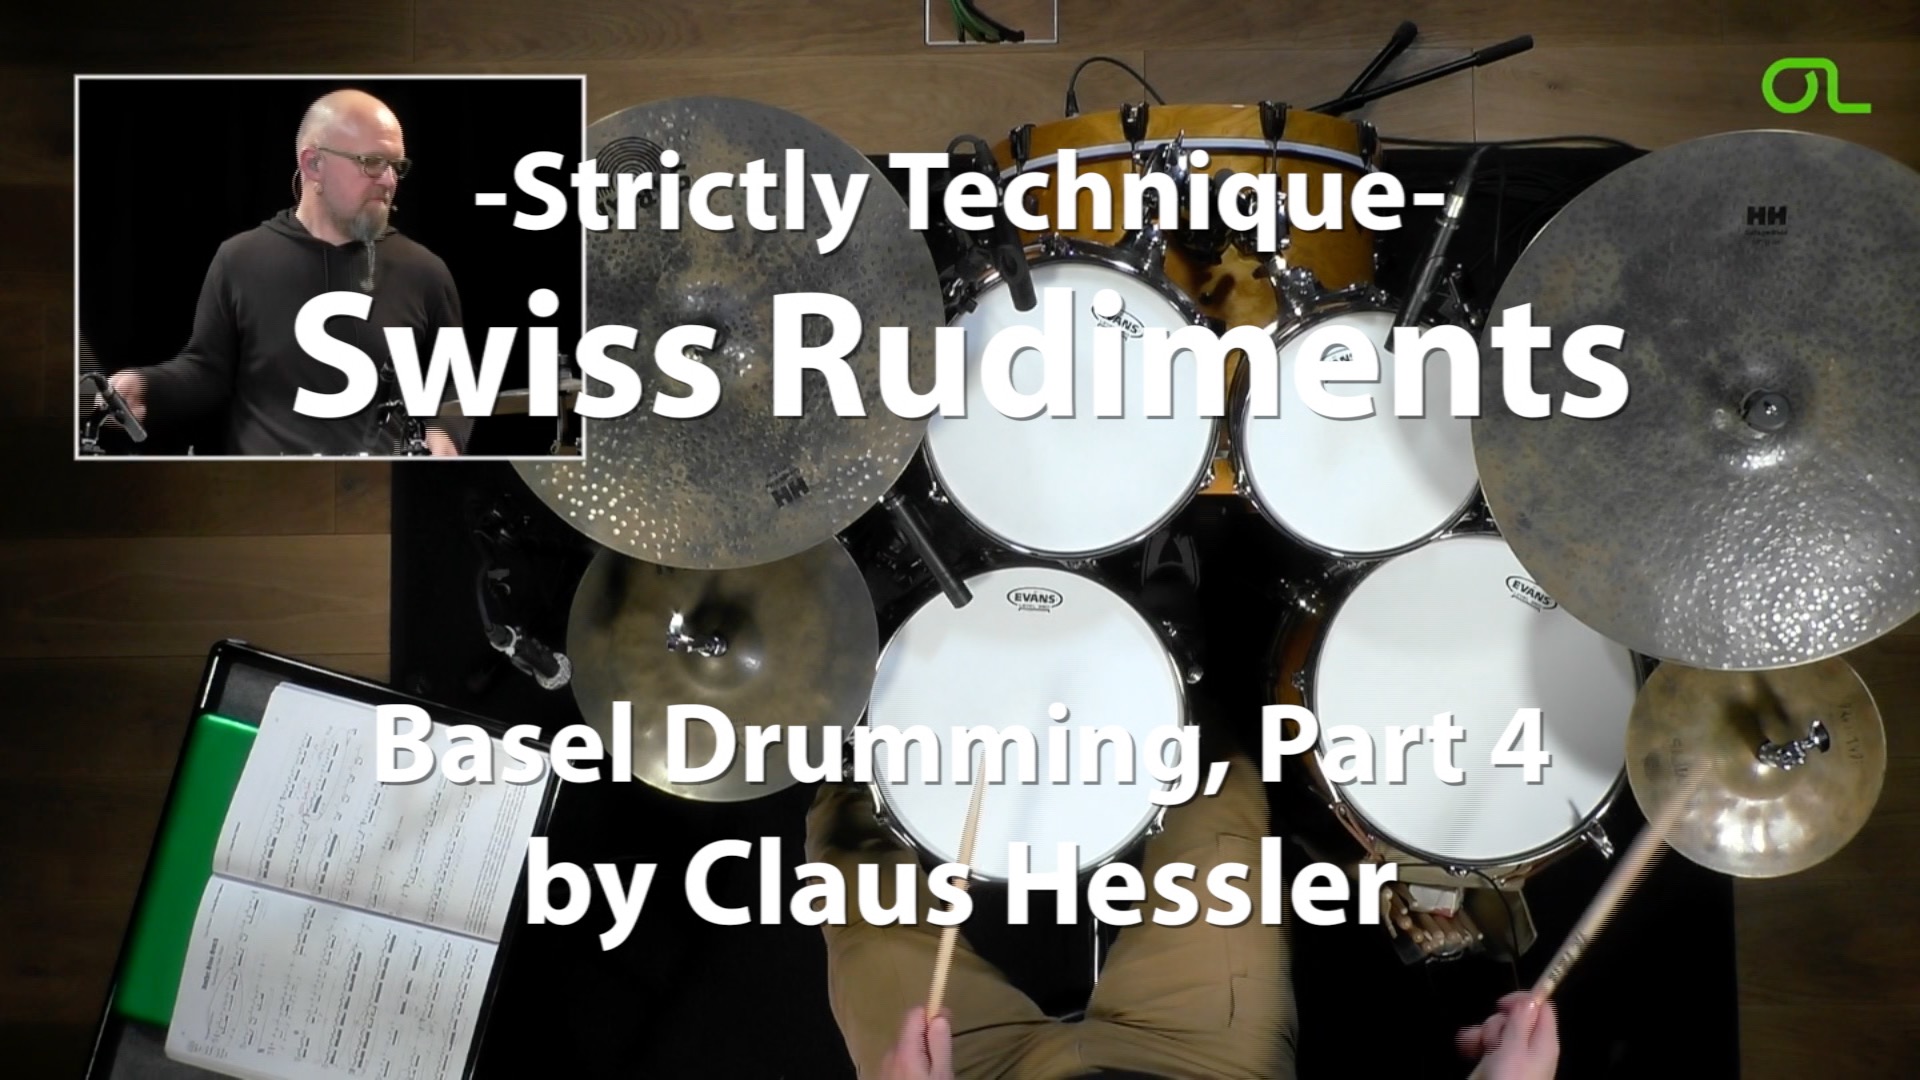 Watch this video lesson - Swiss Rudiments: Basel Drumming, Part 4